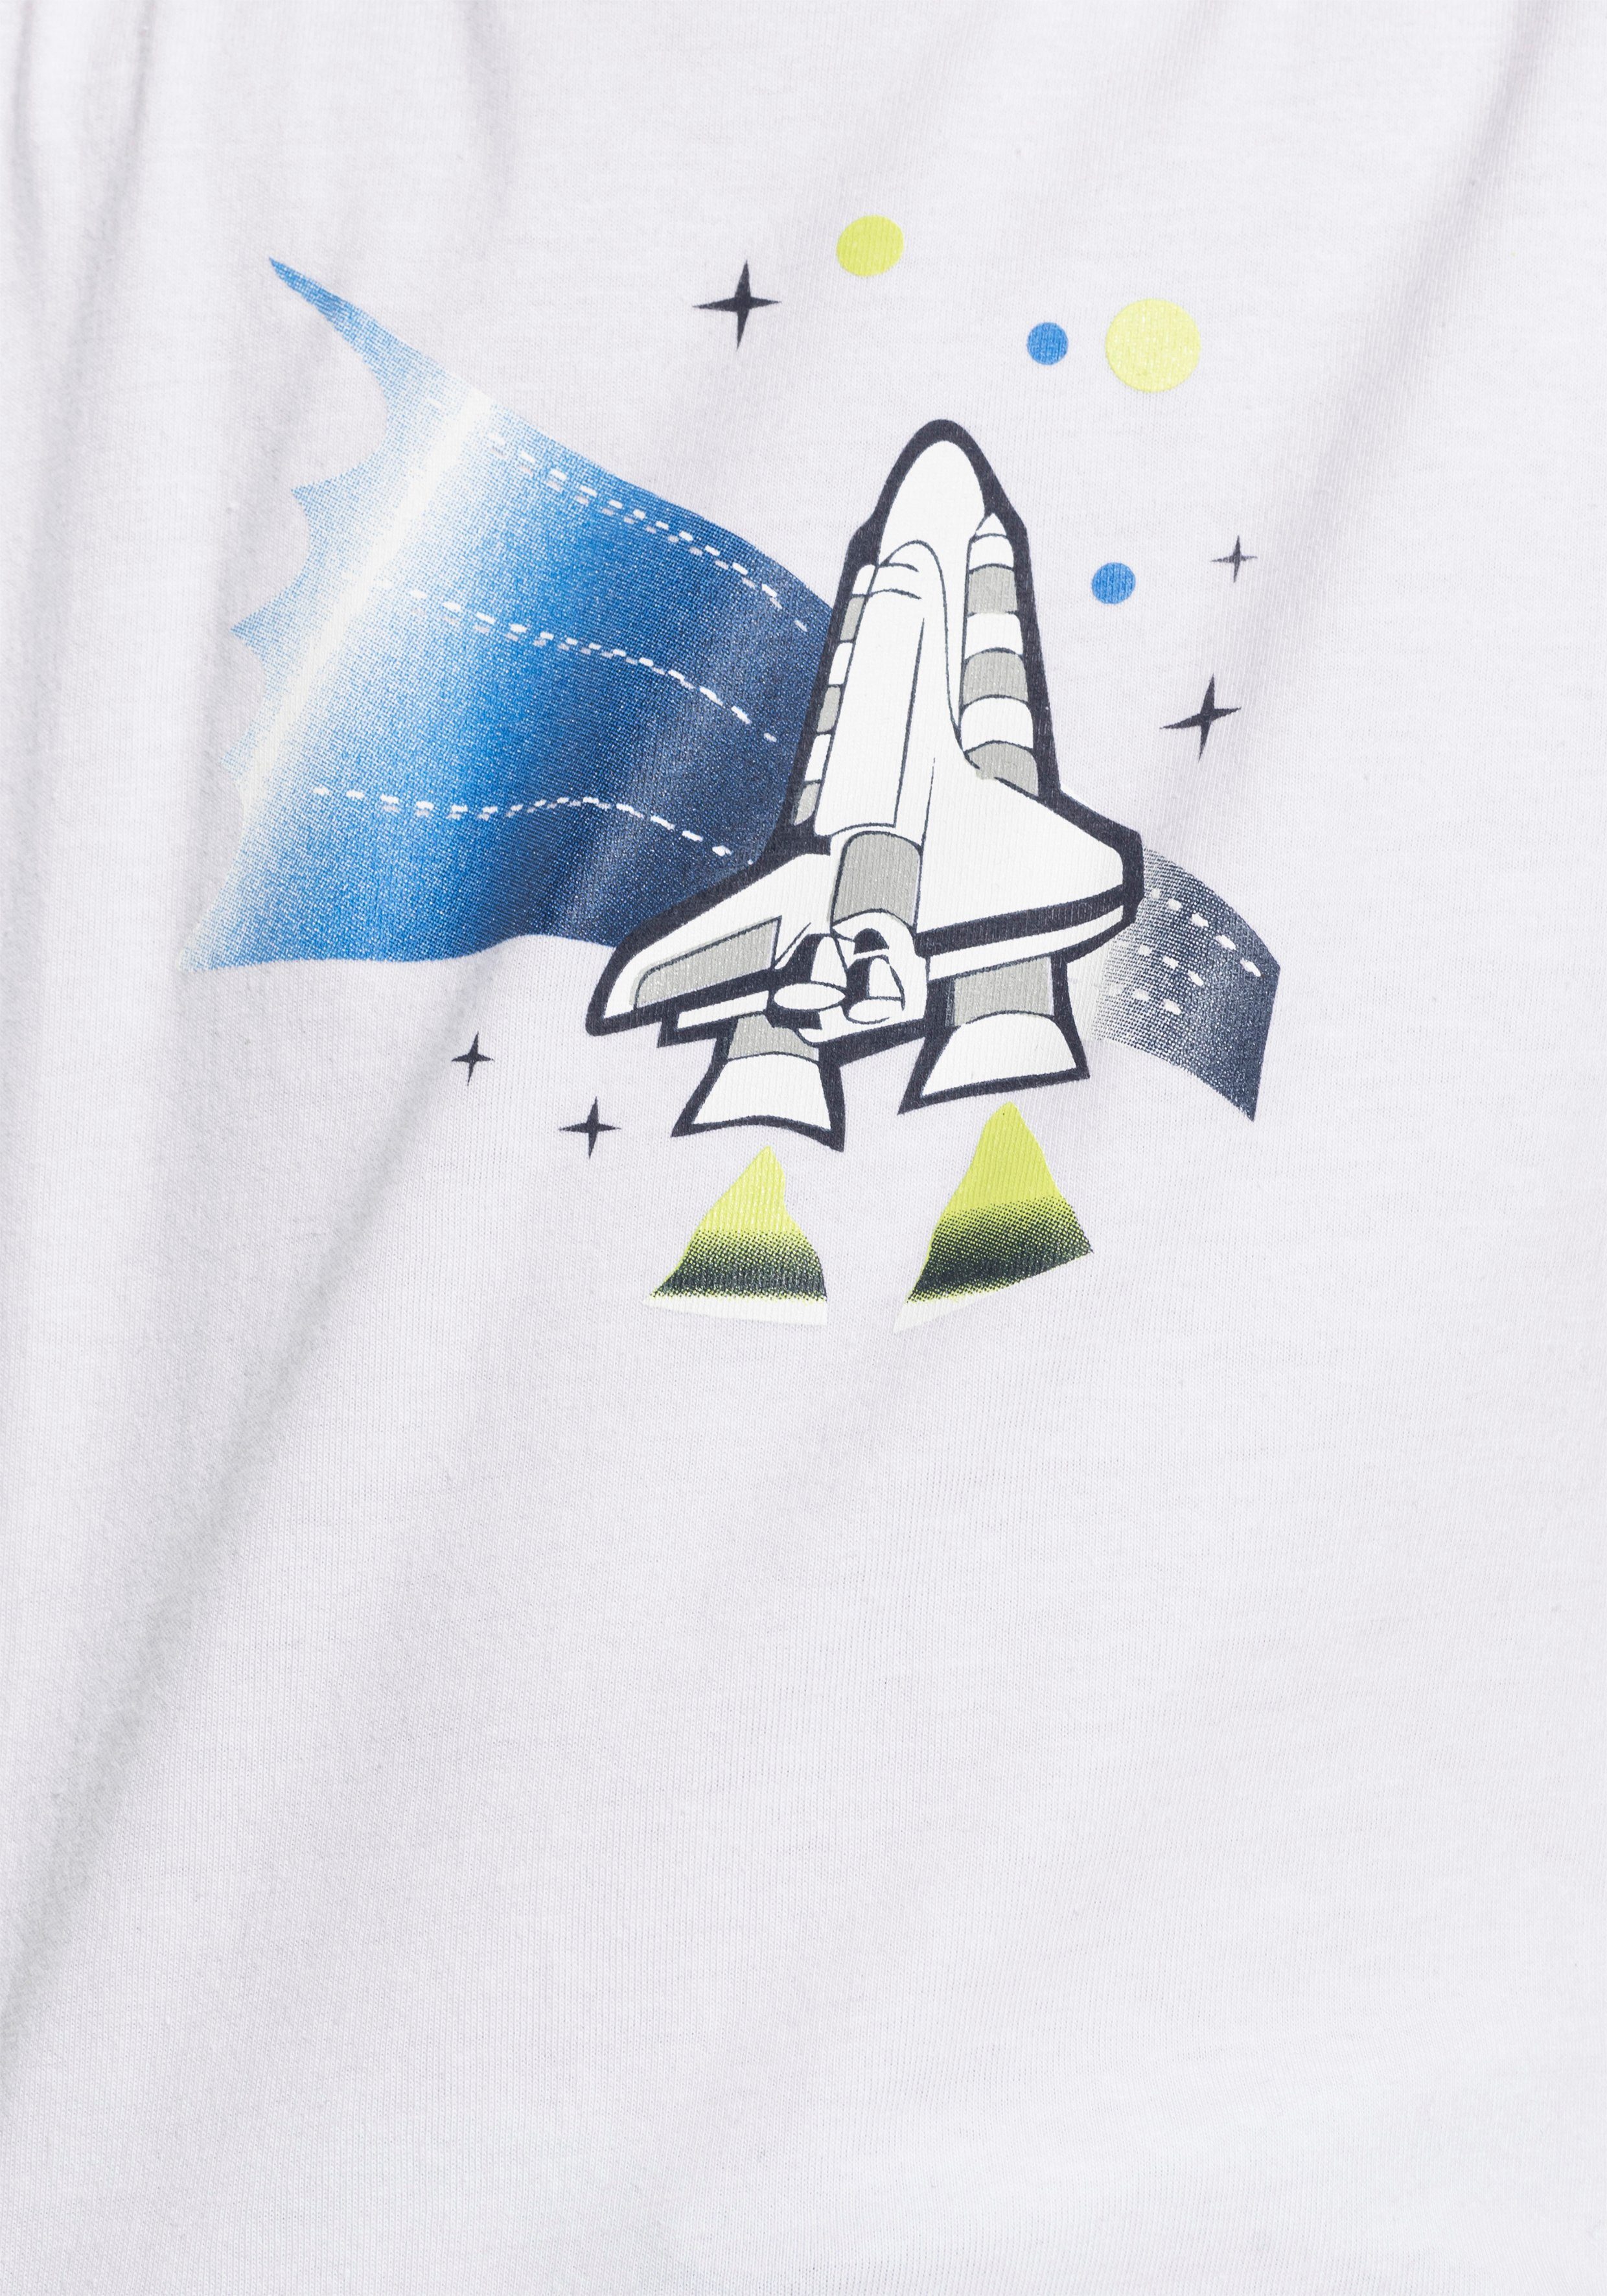 aus Scout SPACE T-Shirt 2er-Pack) (Packung, Bio-Baumwolle